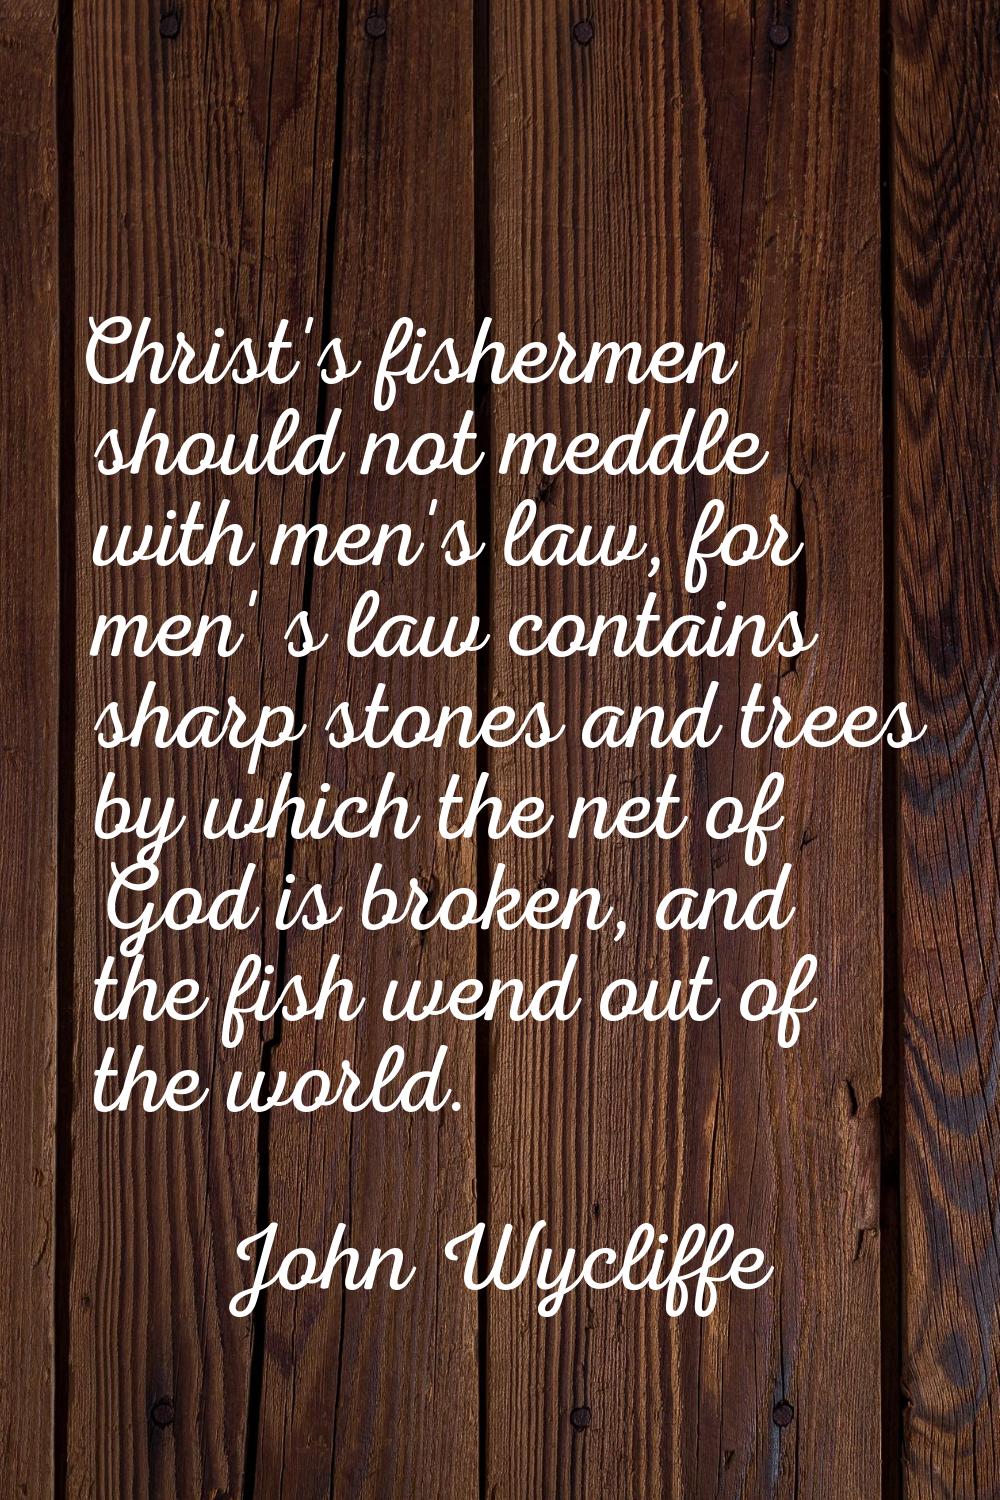 Christ's fishermen should not meddle with men's law, for men' s law contains sharp stones and trees